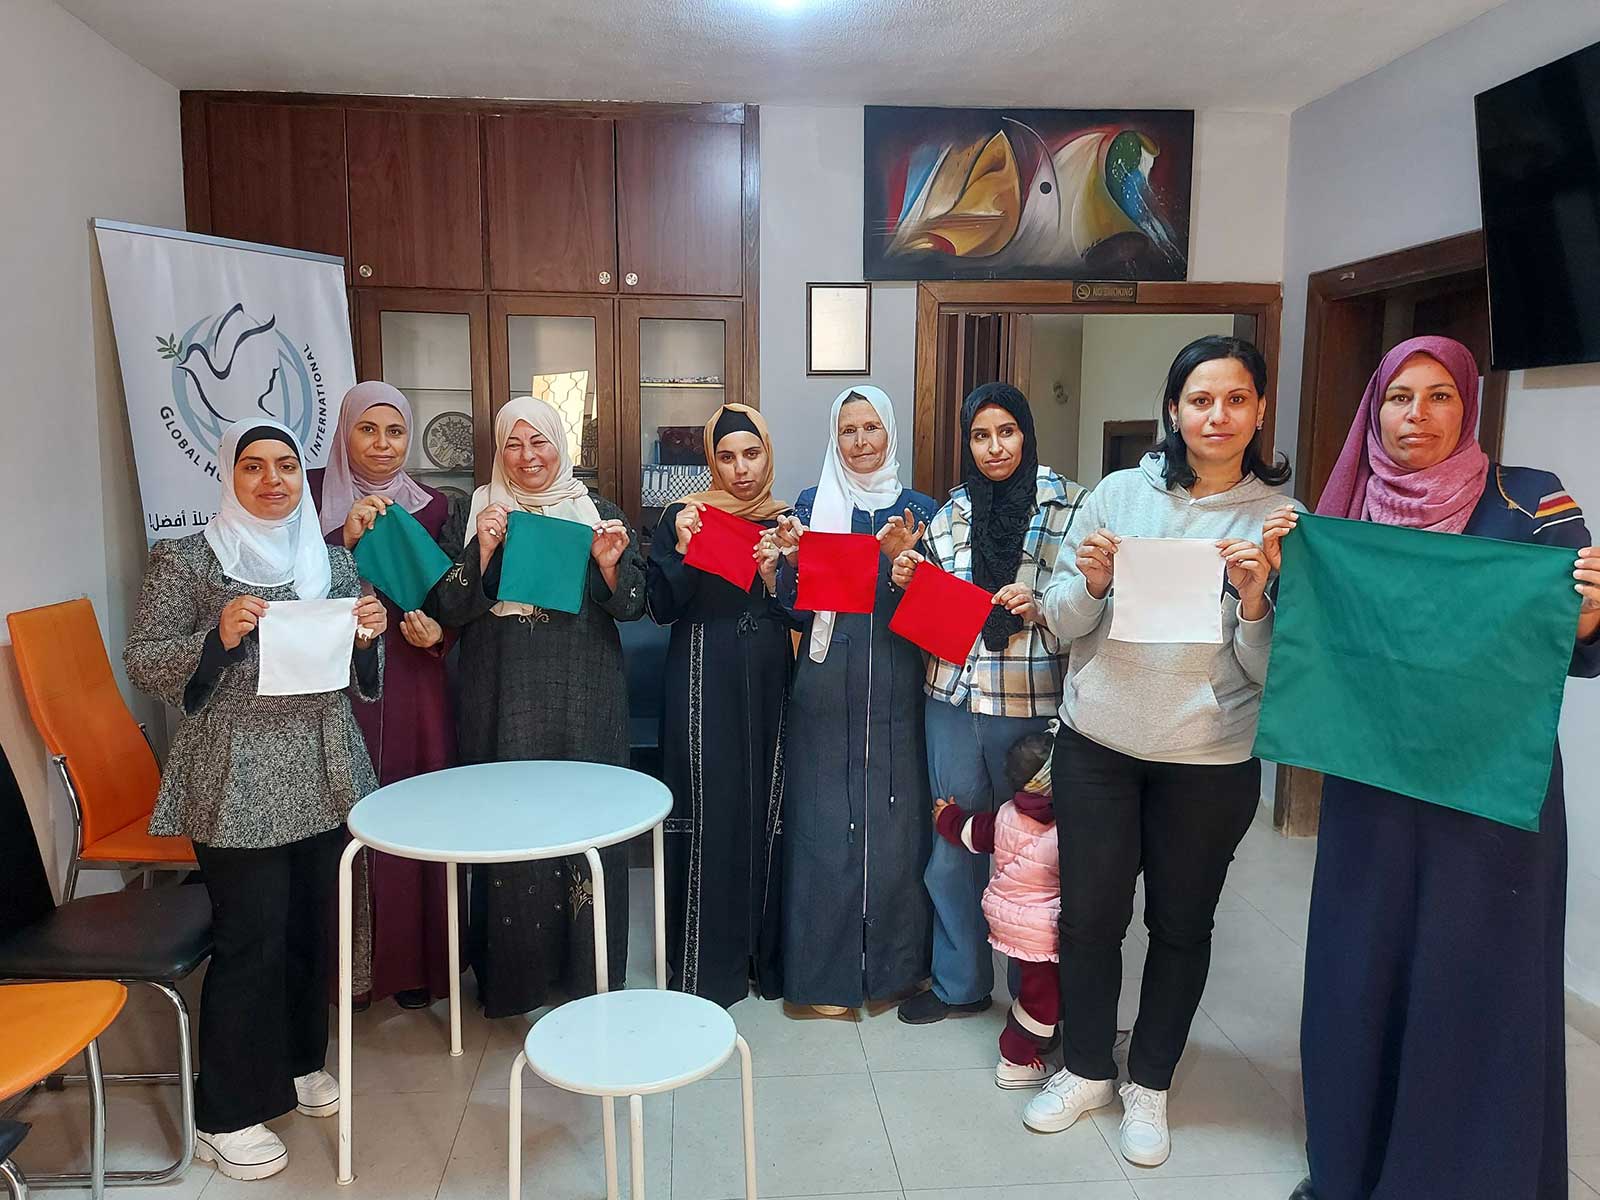 The House of Ruth students each holding their square sewing project.